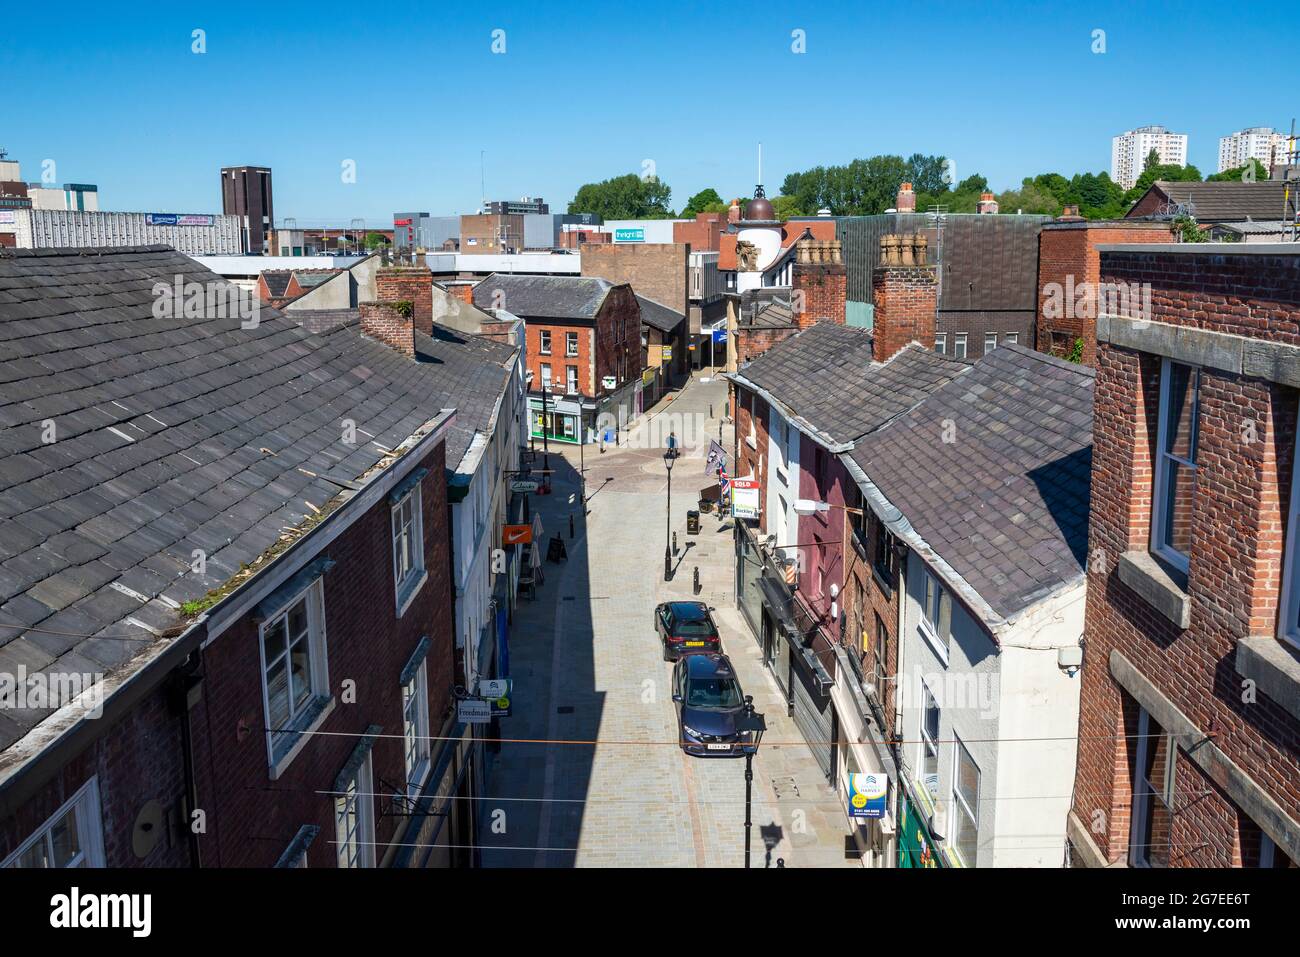 View from St Petersgate bridge of Little Underbank in the town of Stockport, Greater Manchester, England. Stock Photo